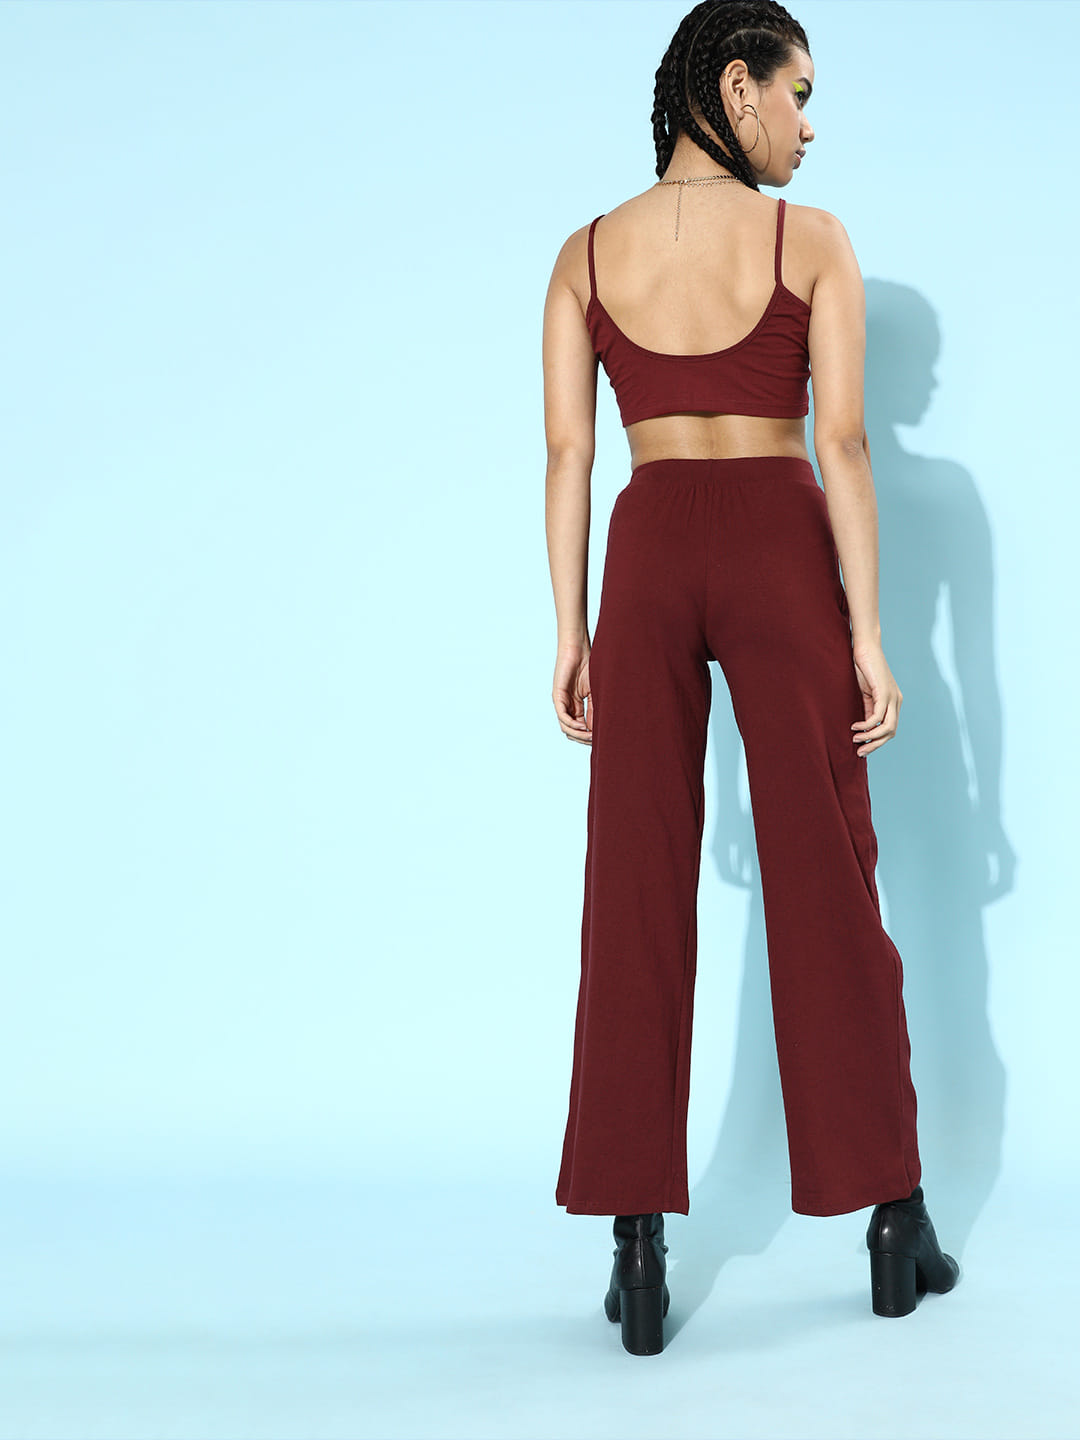 SCORPIUS Maroon Deep neck Coord Set with Pants